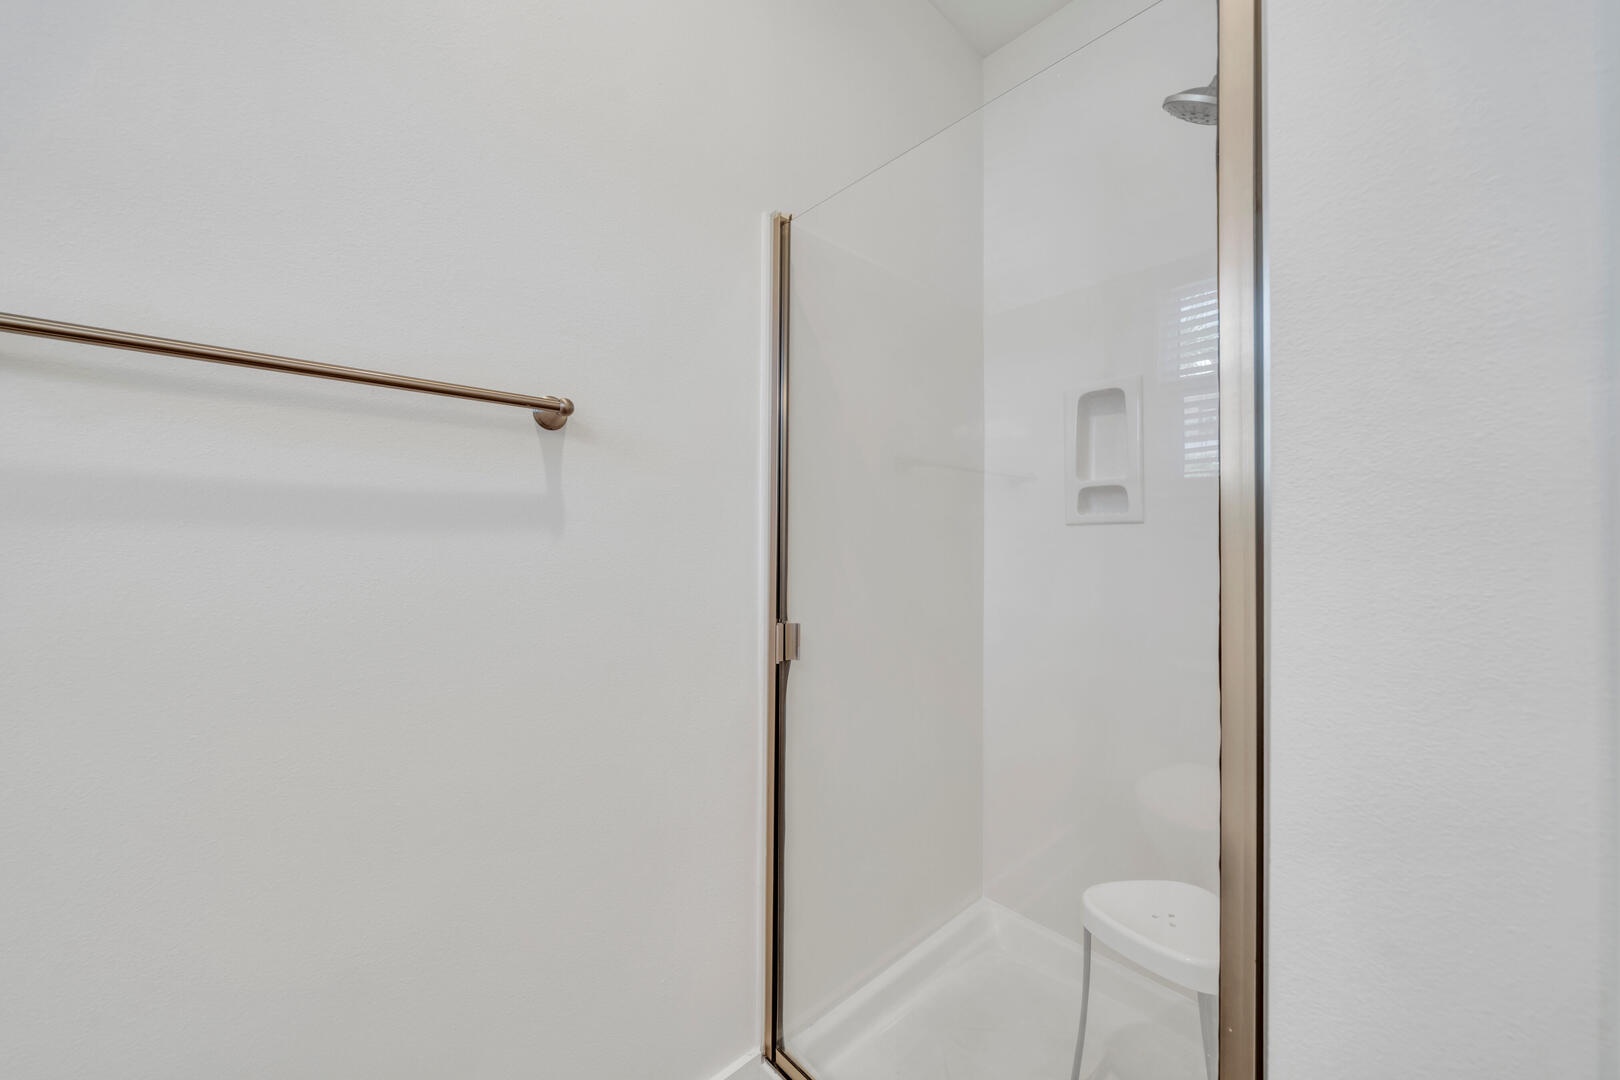 The full-size guest bathroom with walk-in shower!